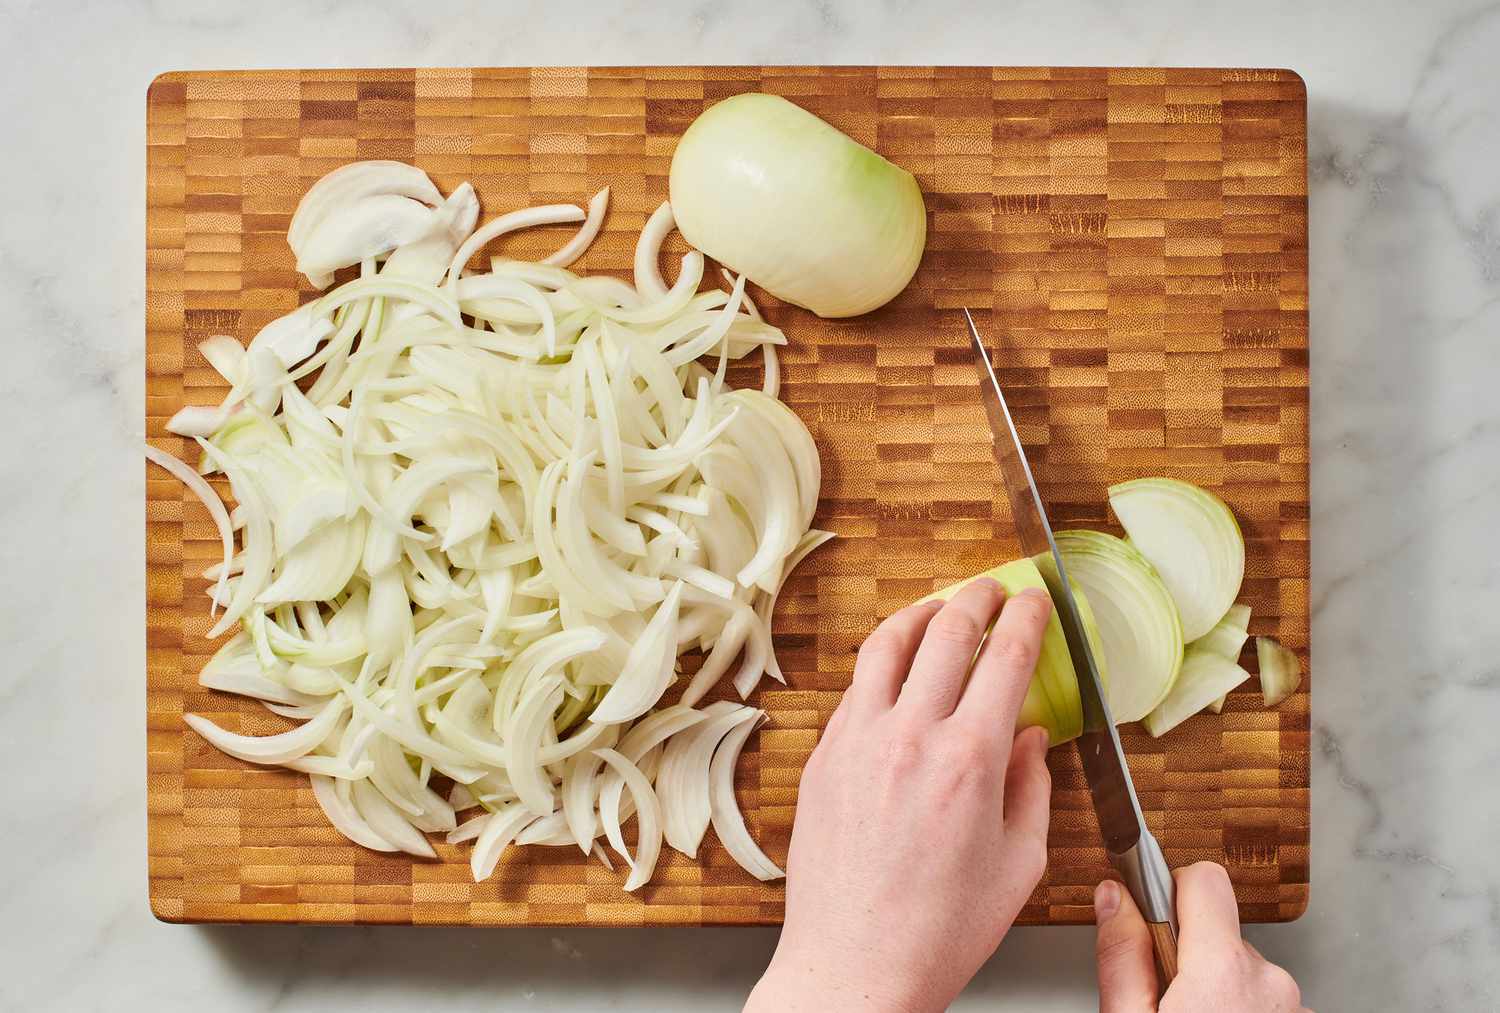 Efficient Onion Slicer - Slice Onions Easily and Quickly